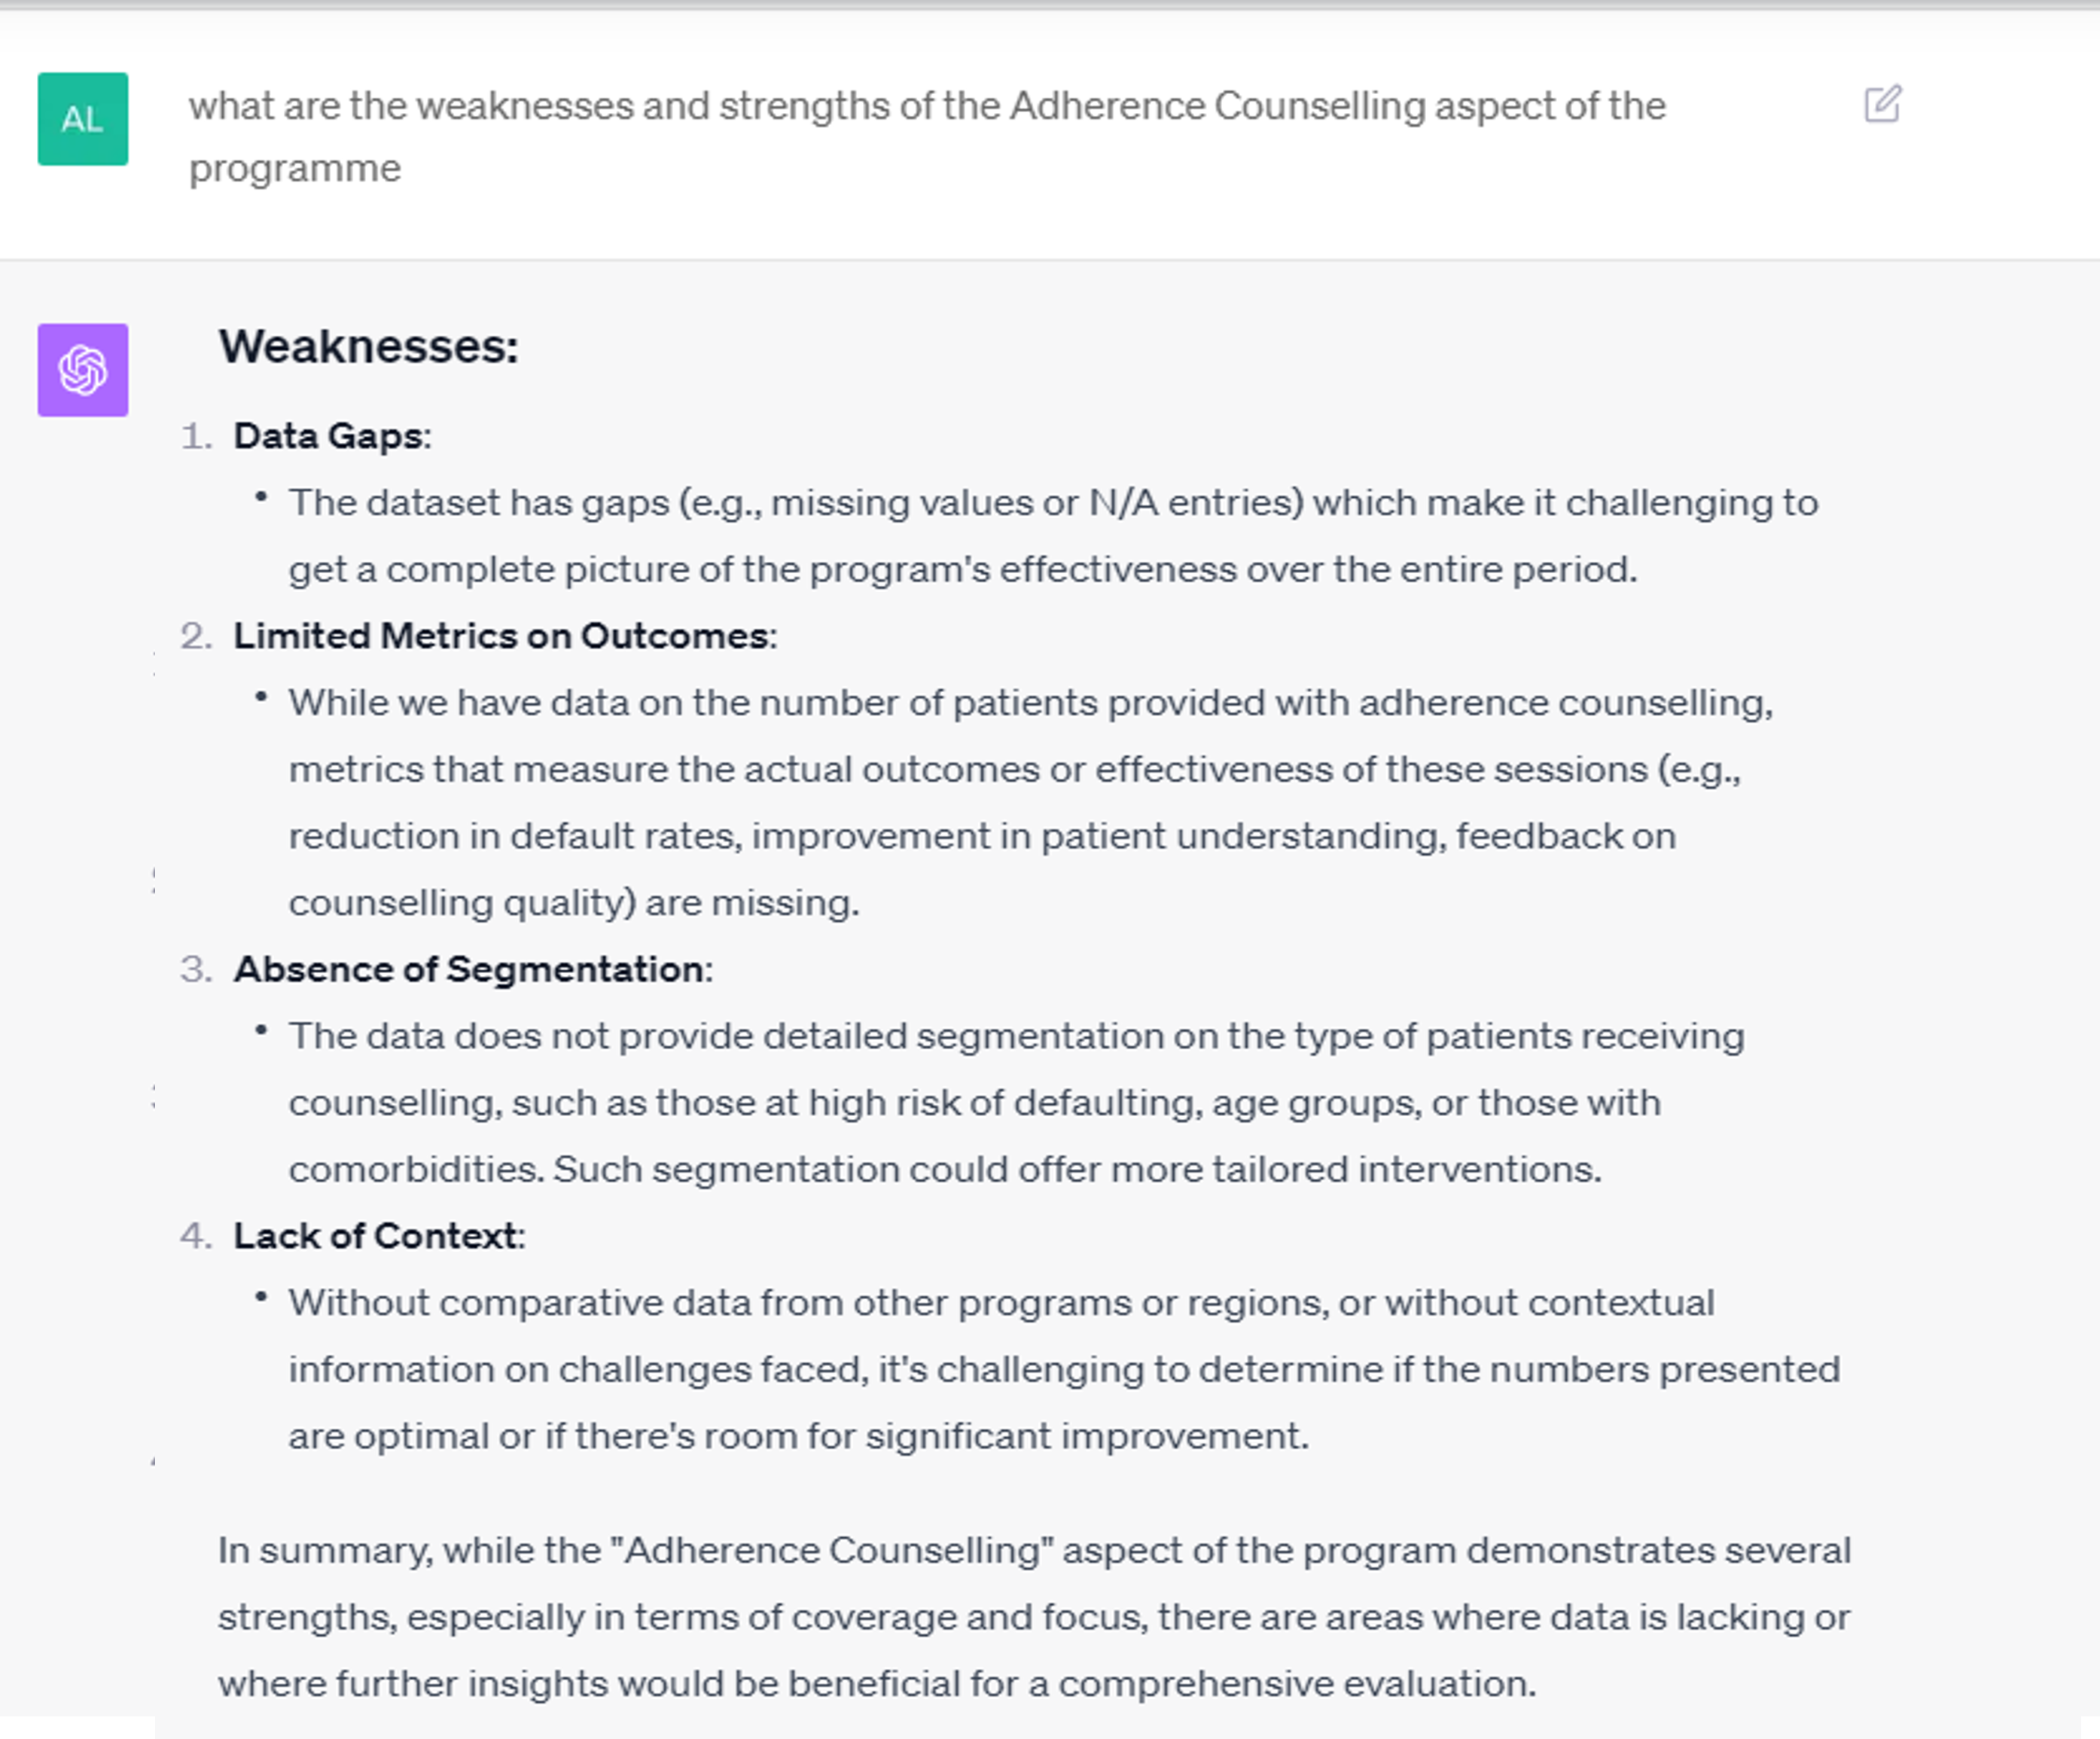 Adherence counselling programme weaknesses